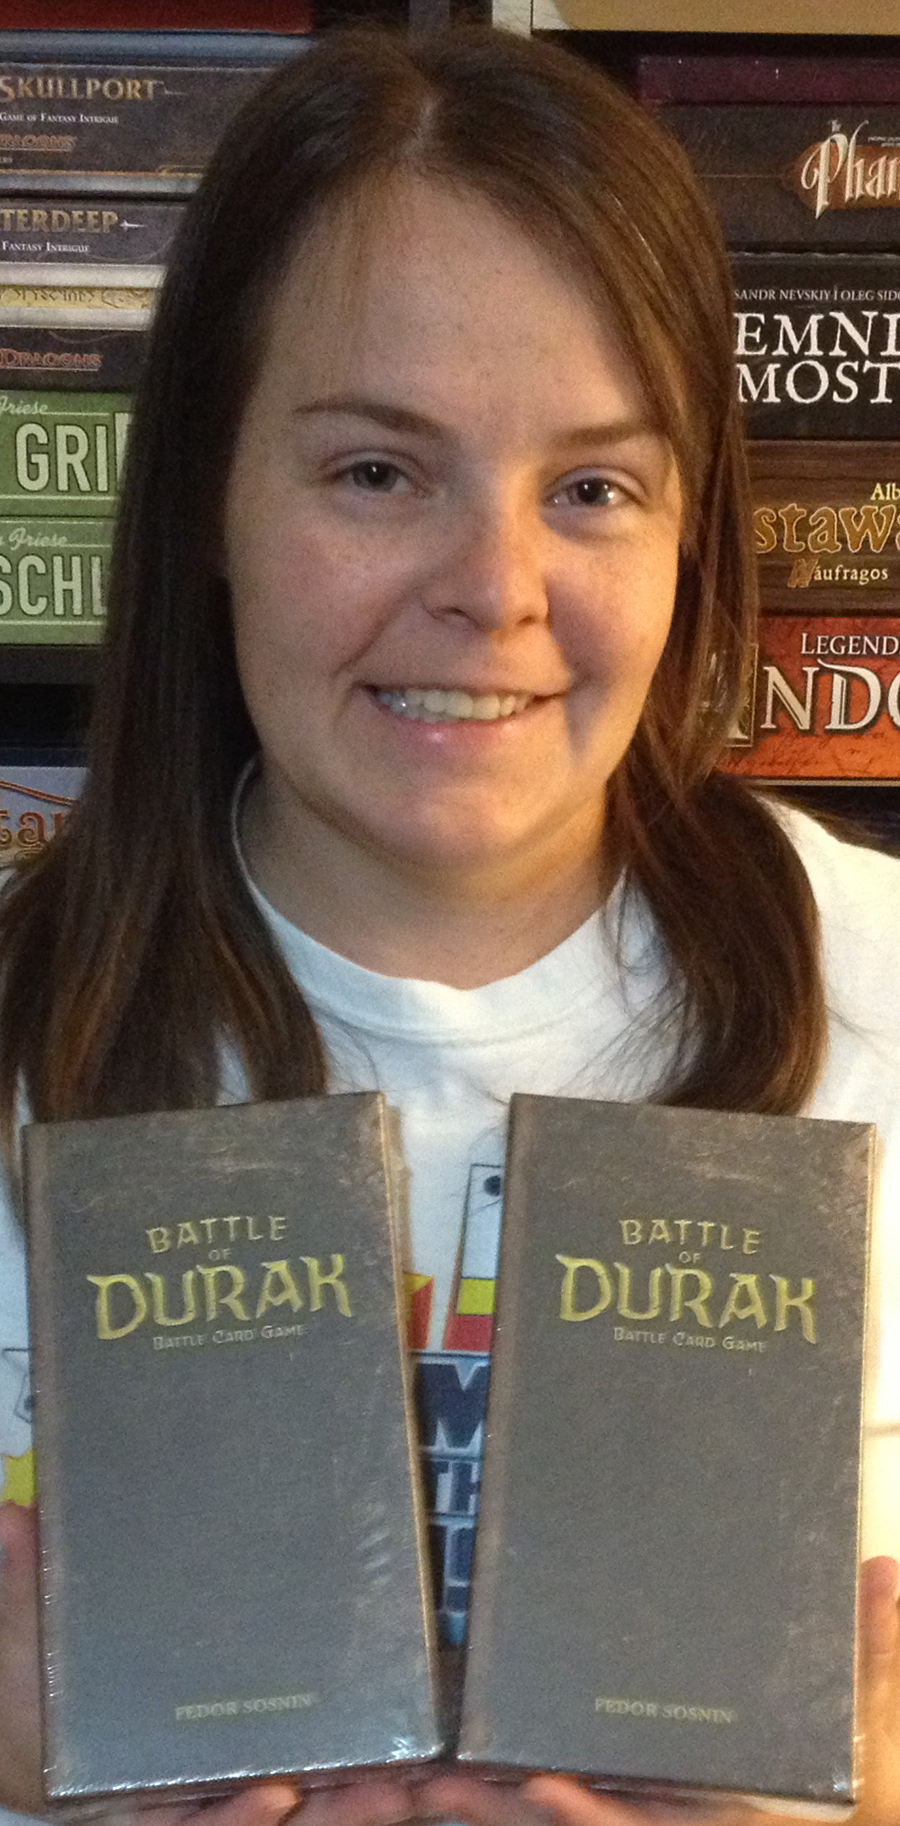 Molly holding two copies of Battle of Durak